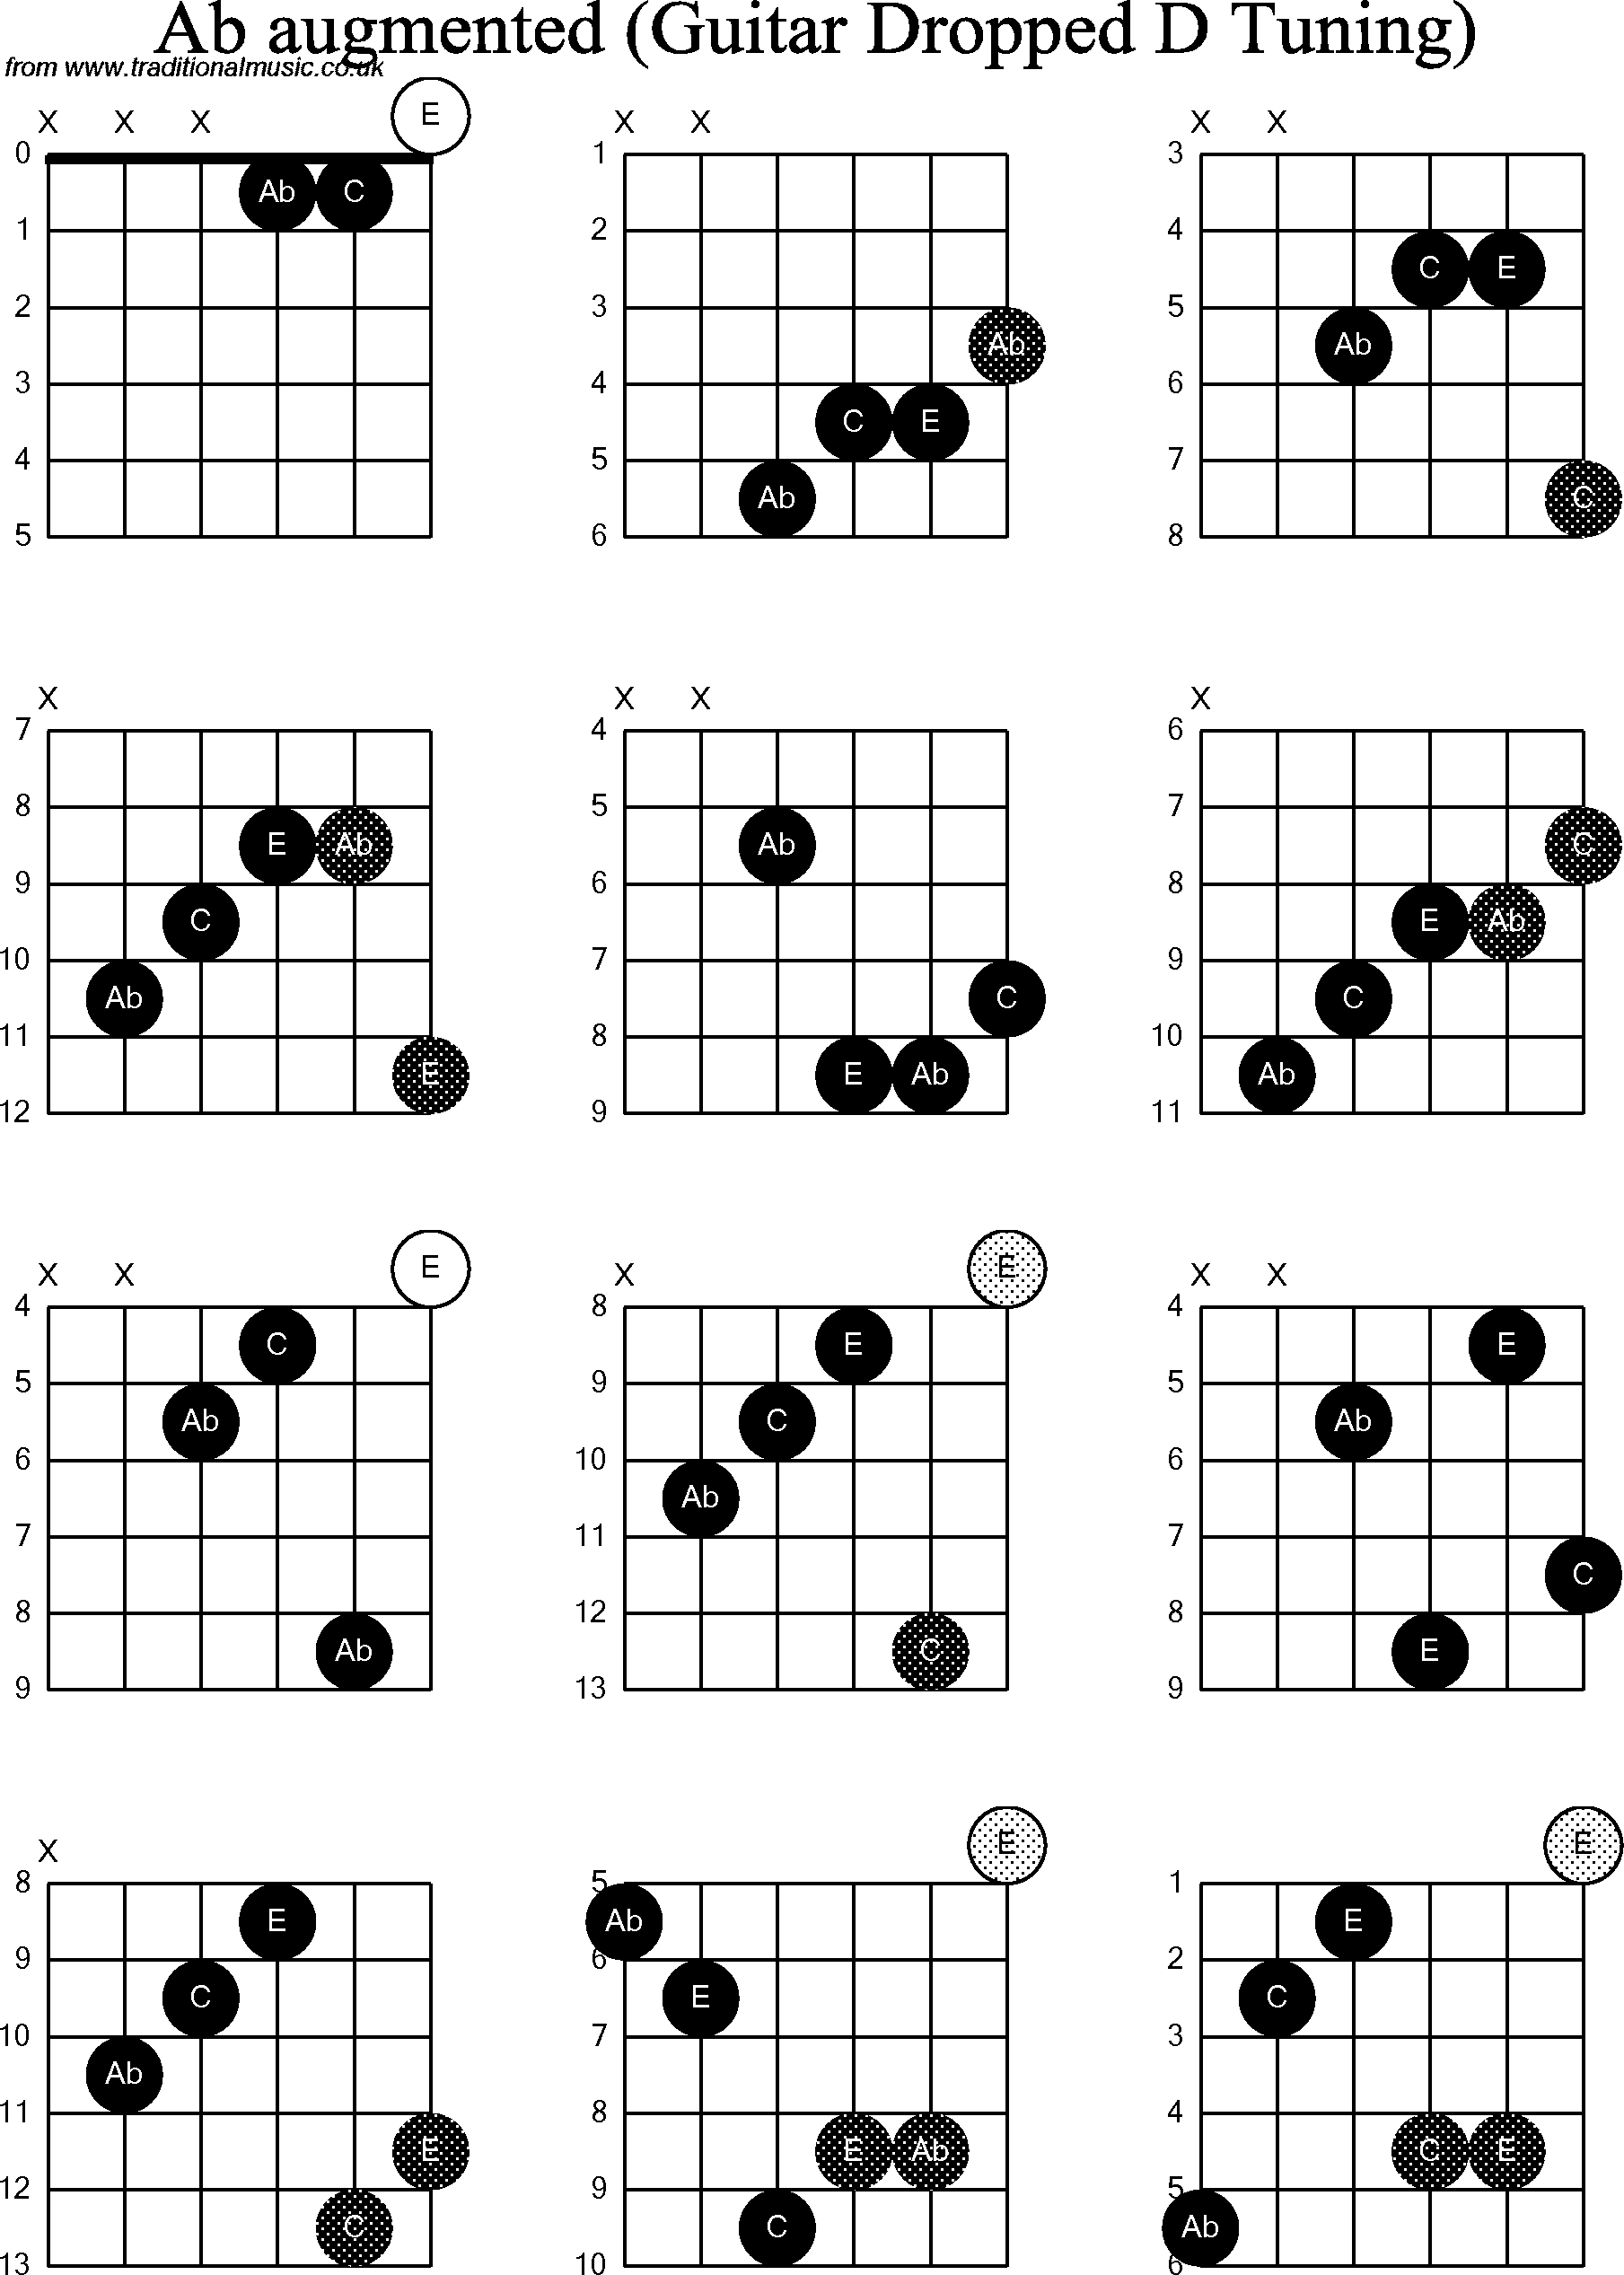 Chord diagrams for dropped D Guitar(DADGBE), Ab Augmented